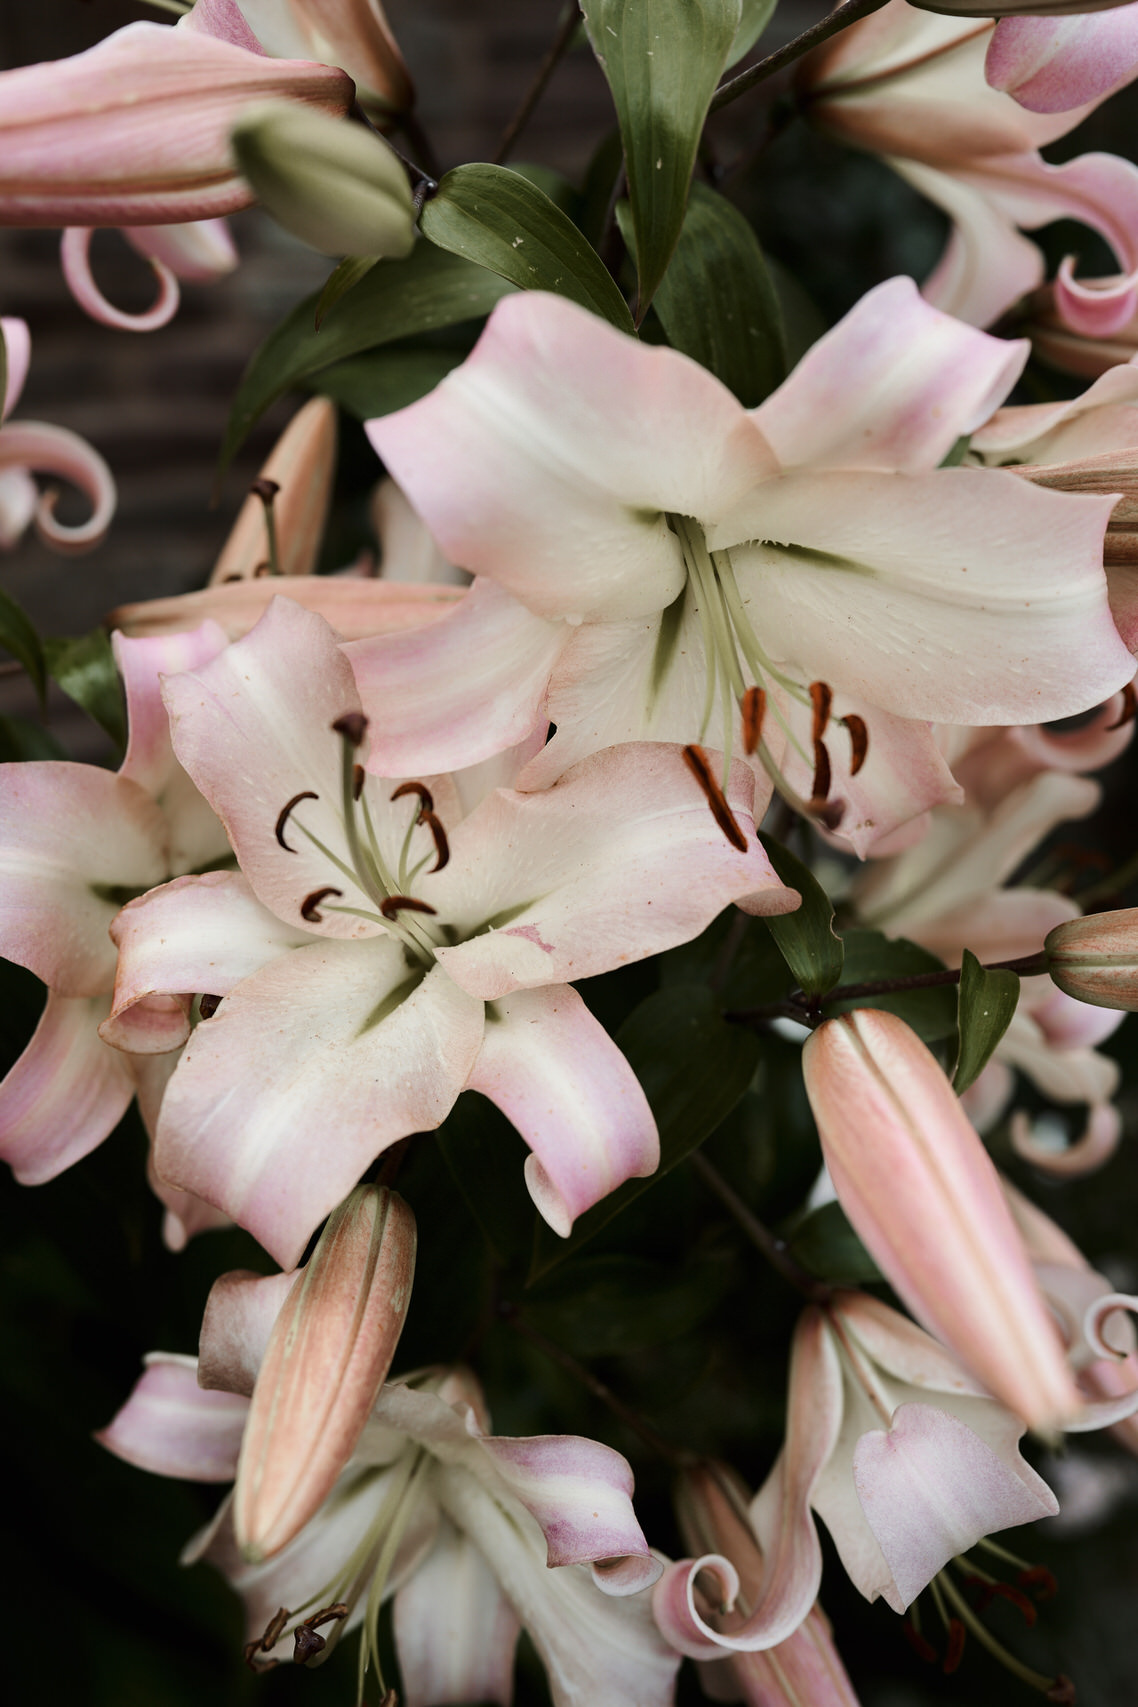 A close look at some pink lilies.